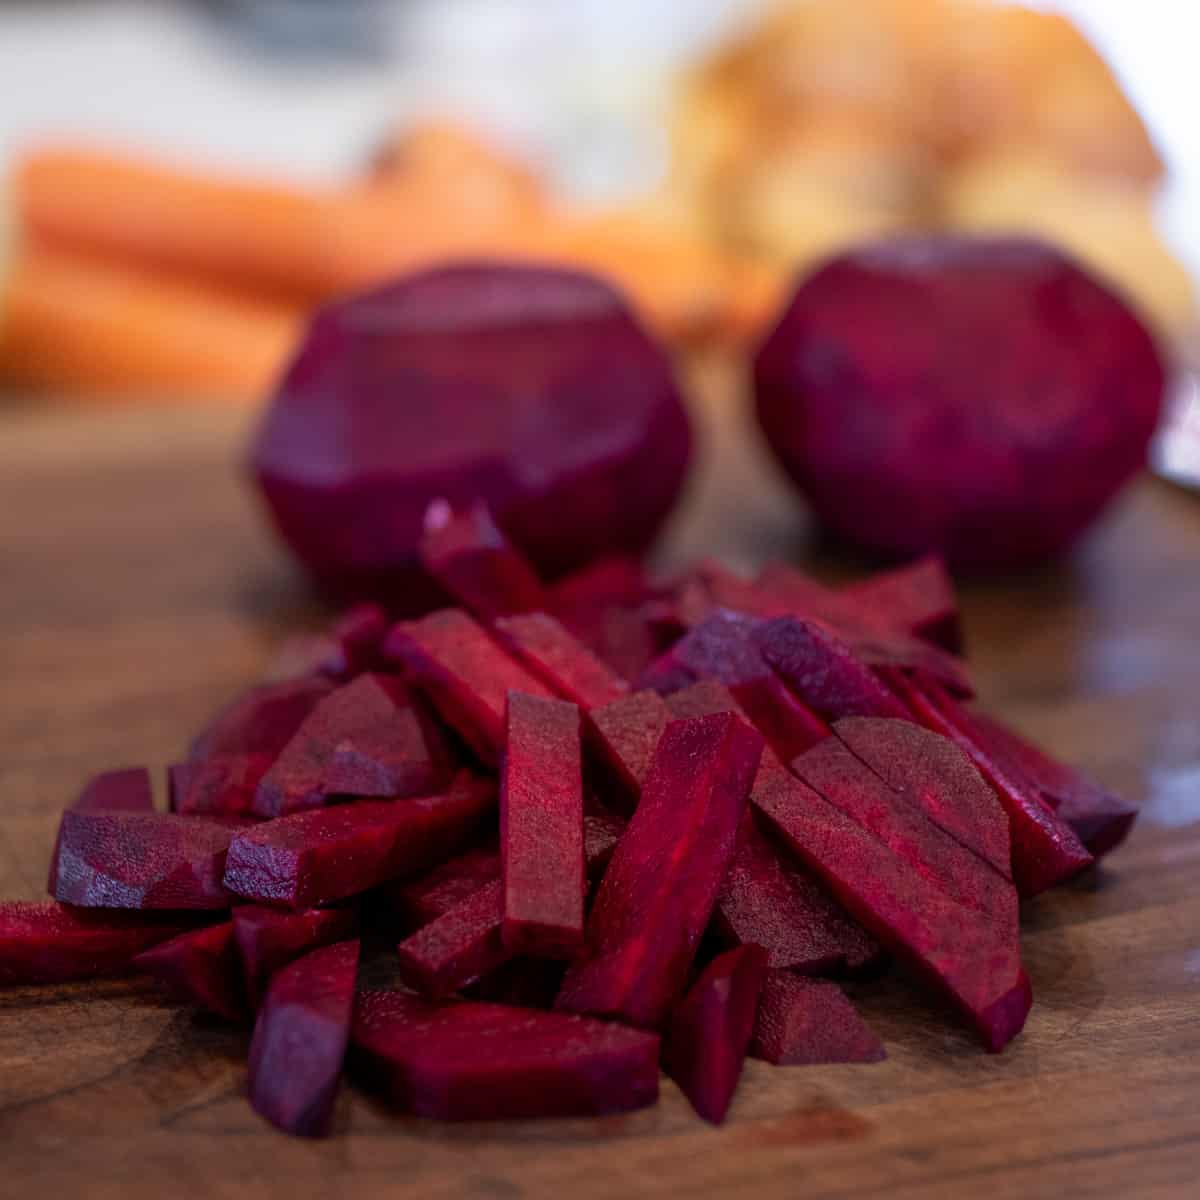 Fresh beets peeled and cut into long sticks similar to French fries.